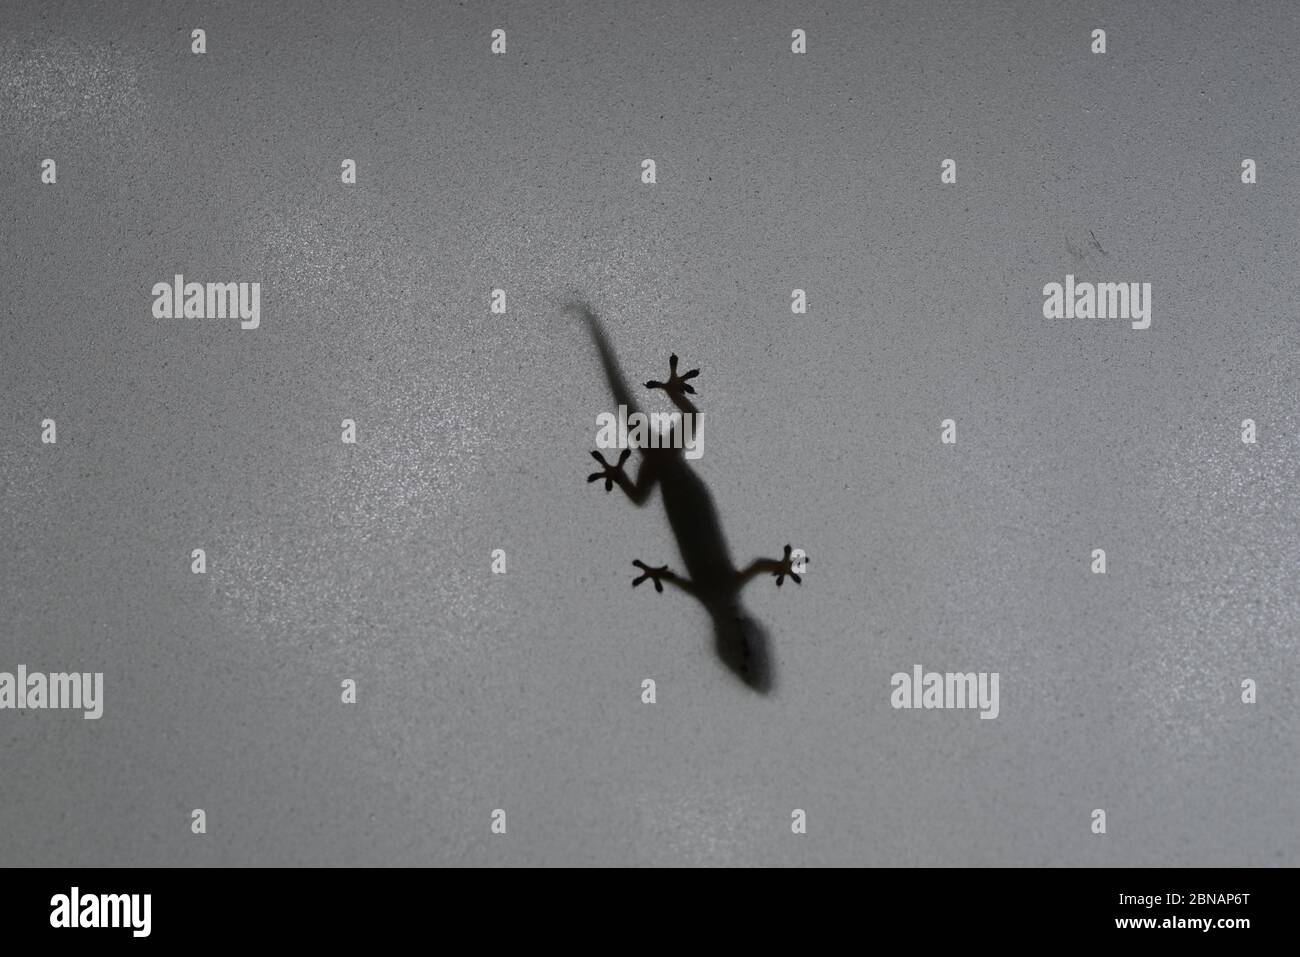 Common house gecko on frosted glass window Stock Photo